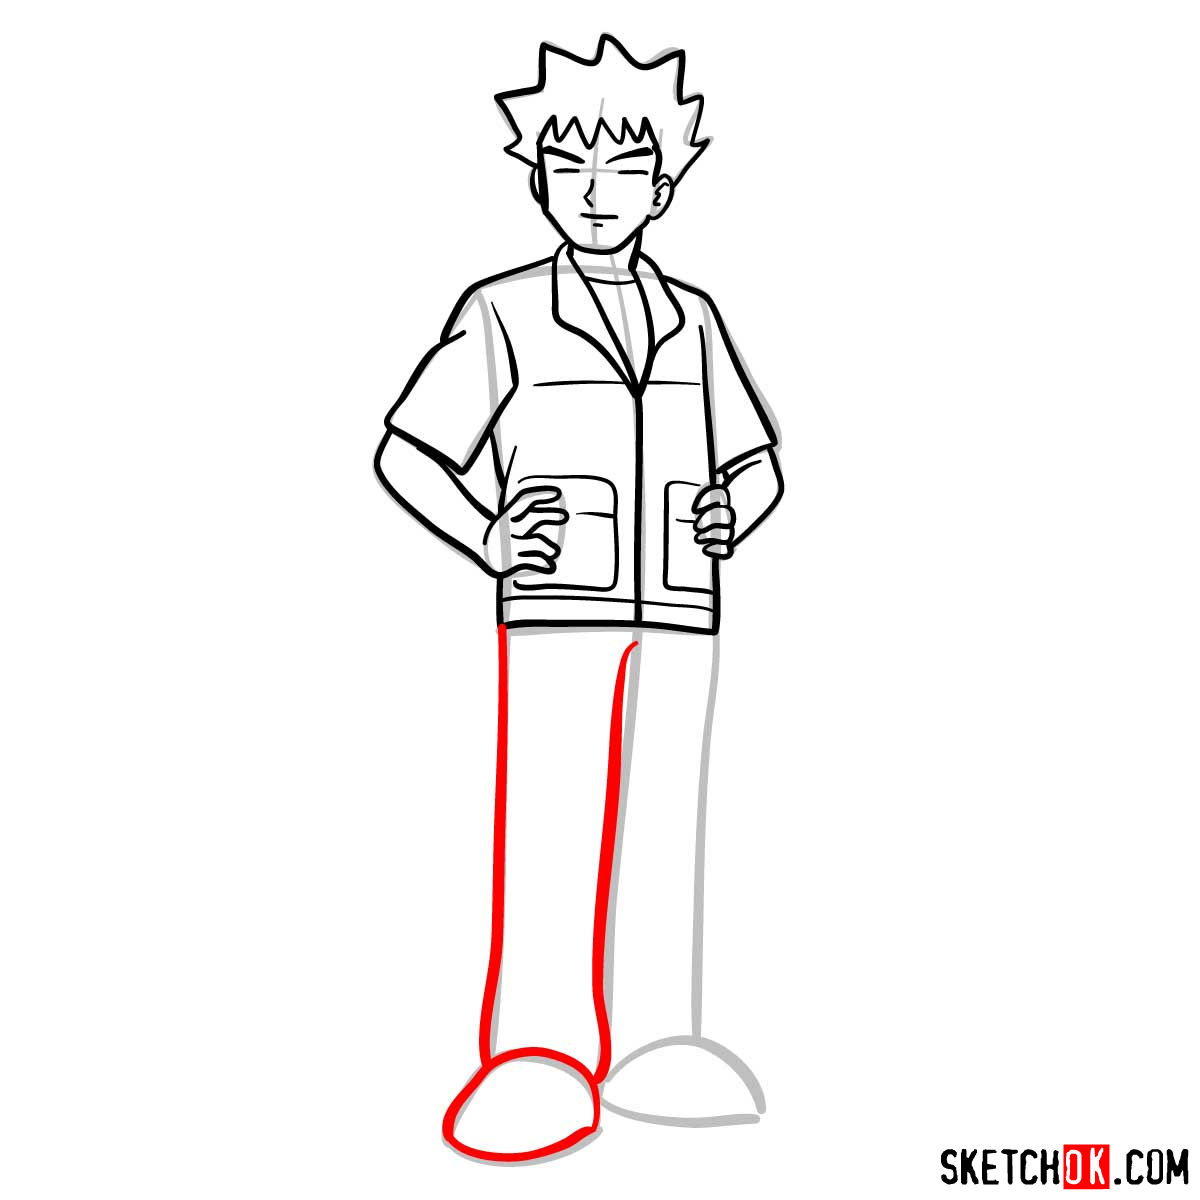 How to draw Brock from Pokemon anime - step 12